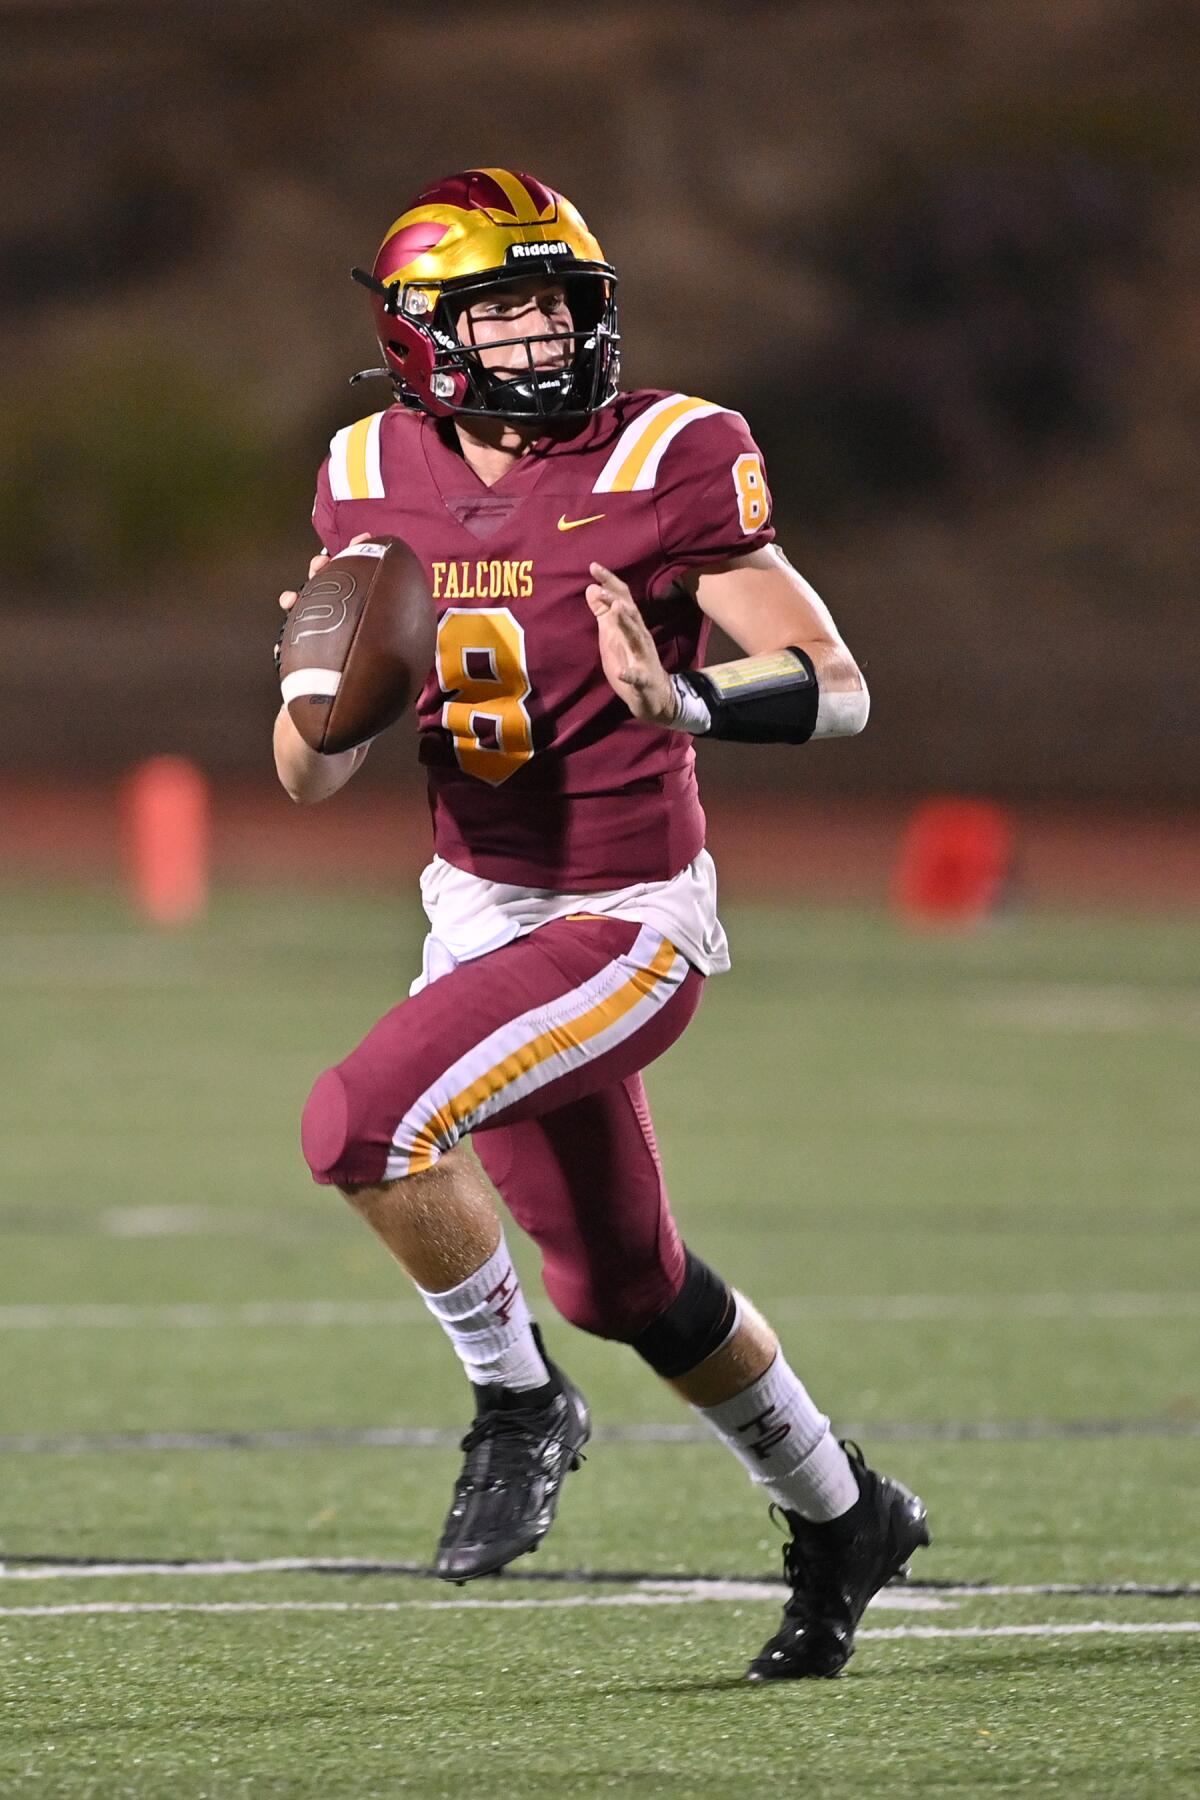 Senior quarterback Remi Baere completed 5 of 7 passes for 133 yards.